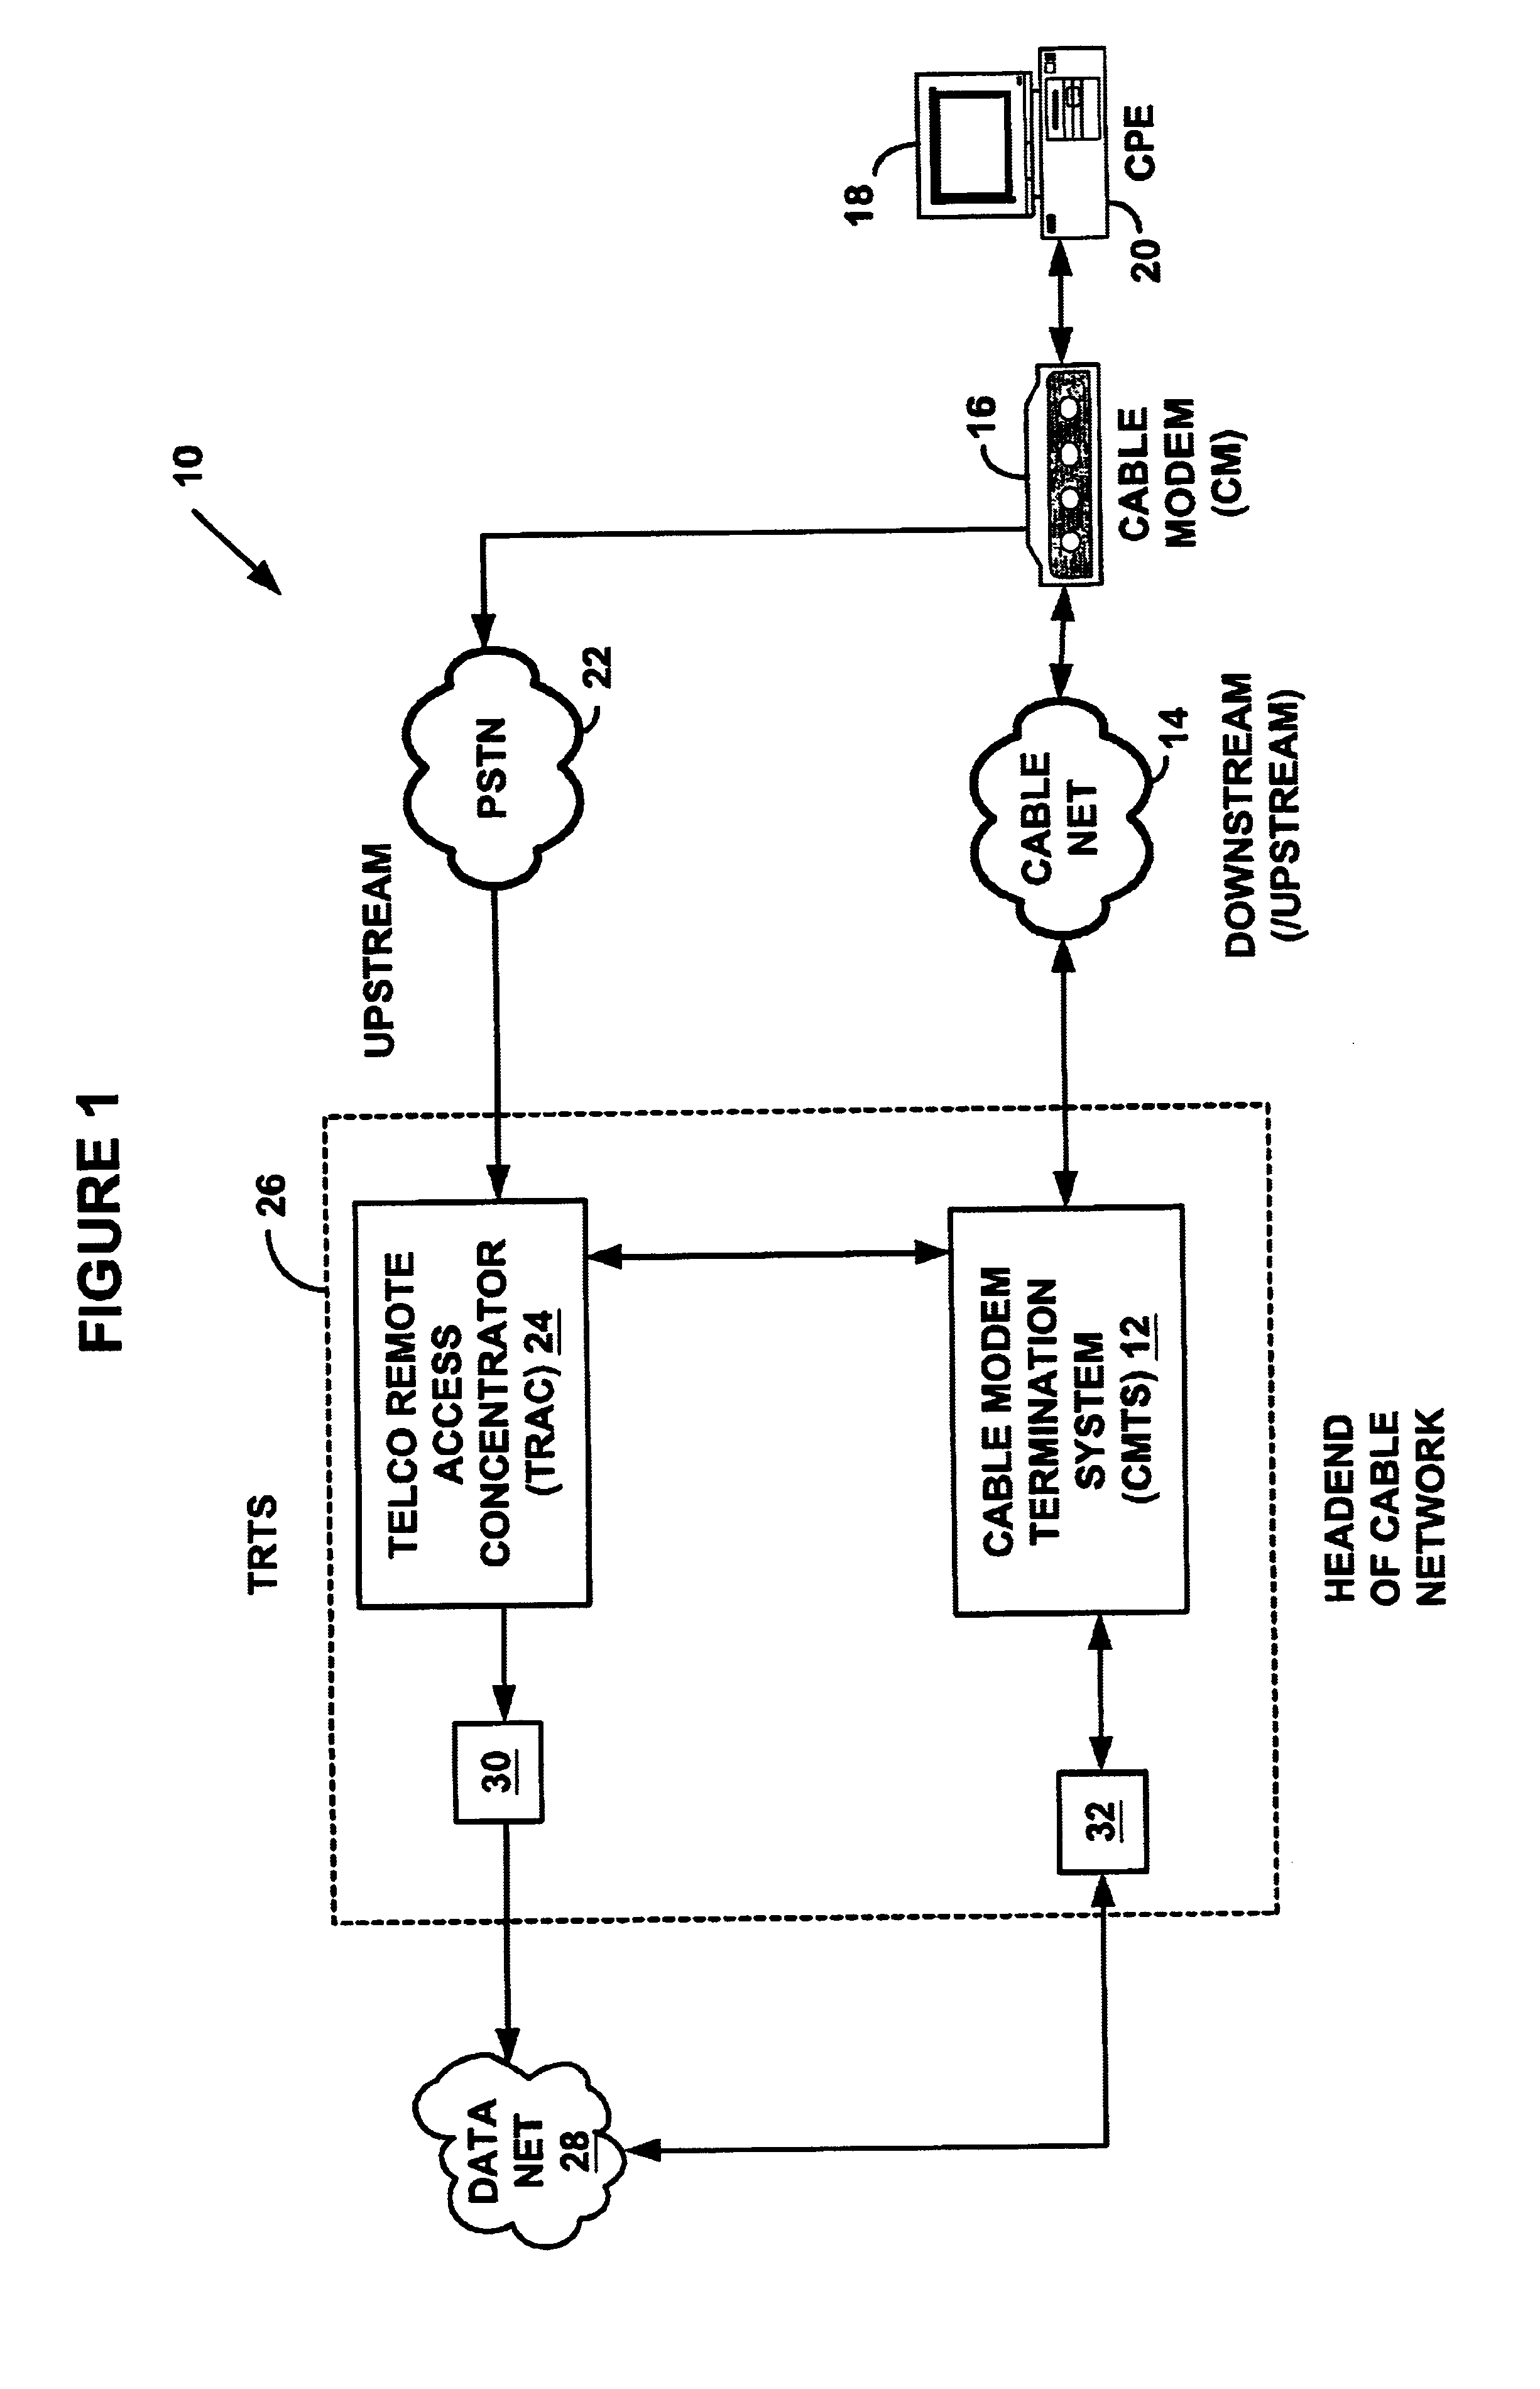 System and method for automatic load balancing in a data-over-cable network